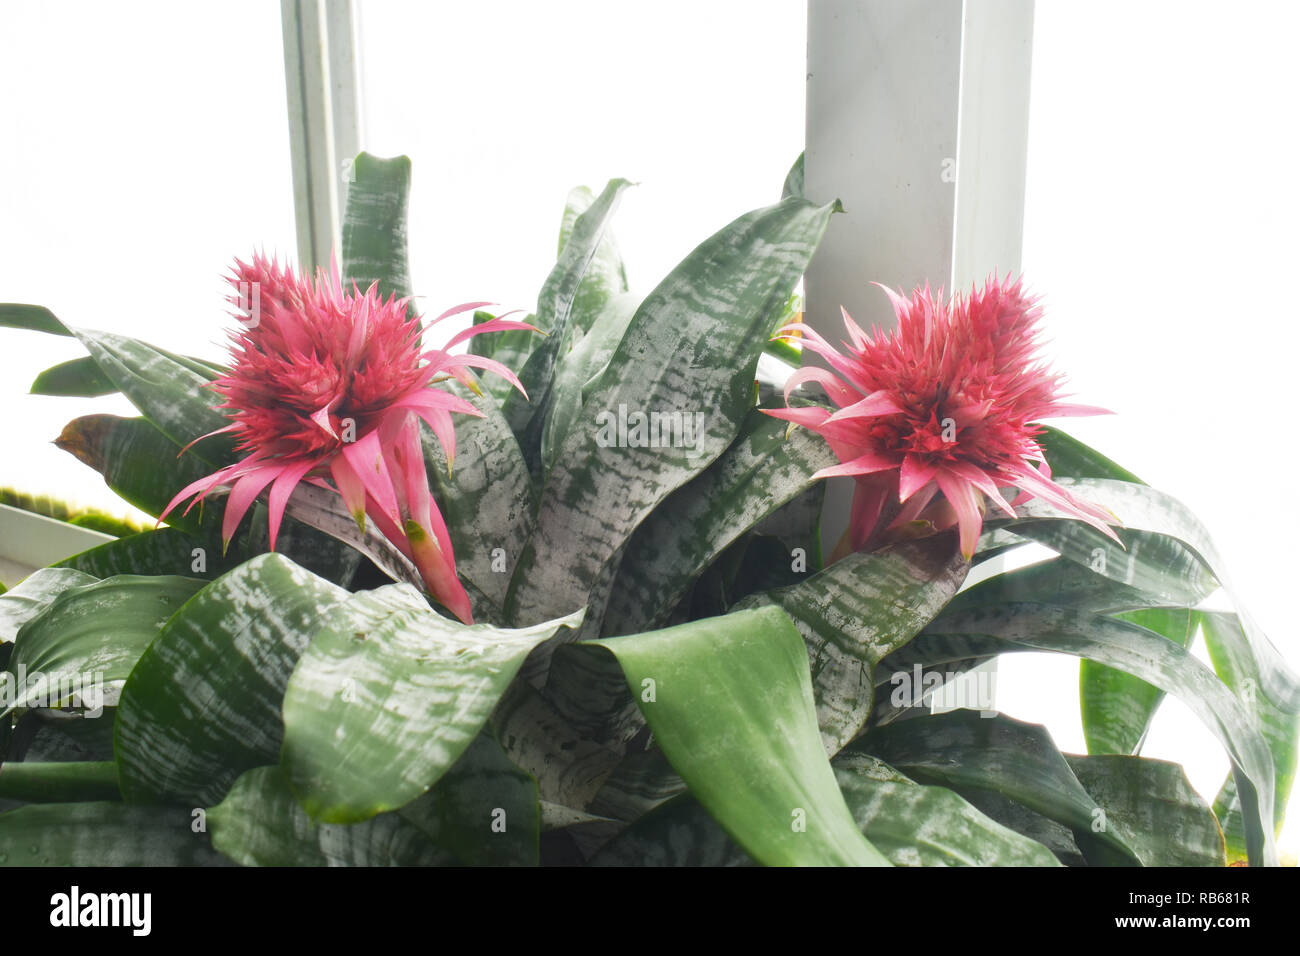 The Bromeliad Aechmea Fasciata plant, also known as Silver Vase, has extravagant and long lasting red flowers Stock Photo